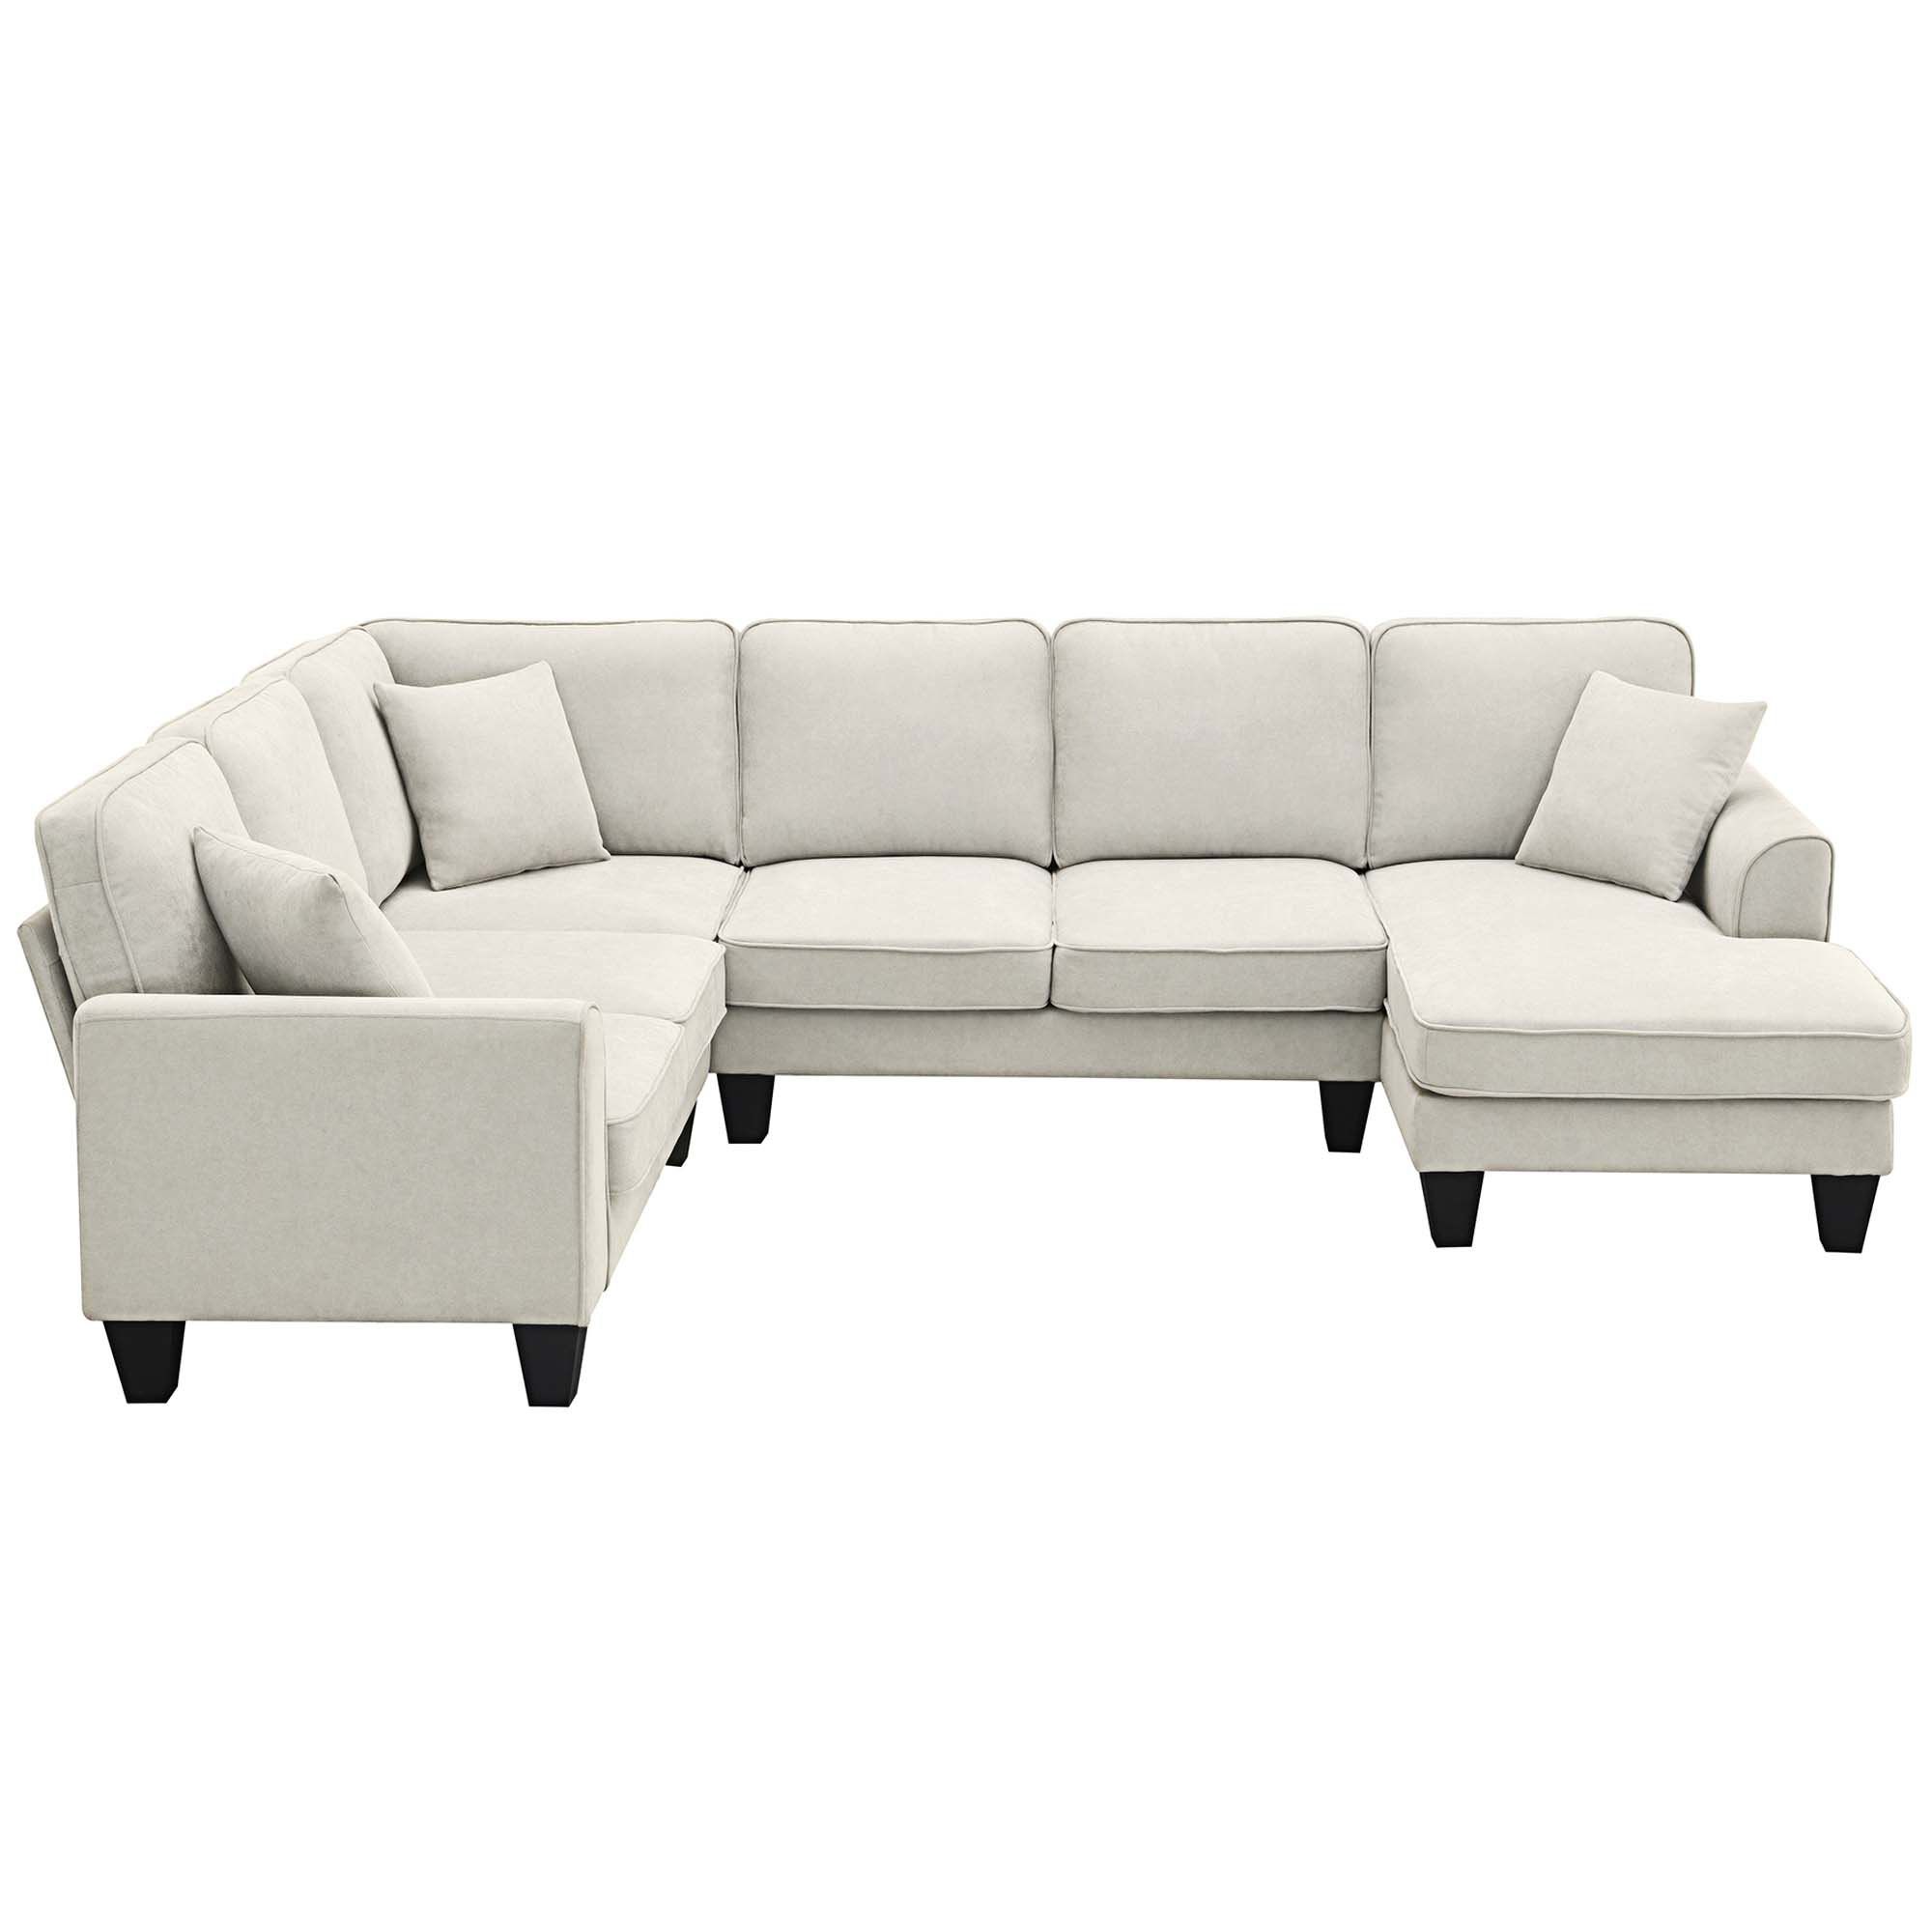 Hokku Designs Jerane Modern U Shape 7 Seat Fabric Sectional Sofa Set With 3  Pillows Included | Wayfair Pertaining To Modern U Shaped Sectional Couch Sets (View 13 of 15)